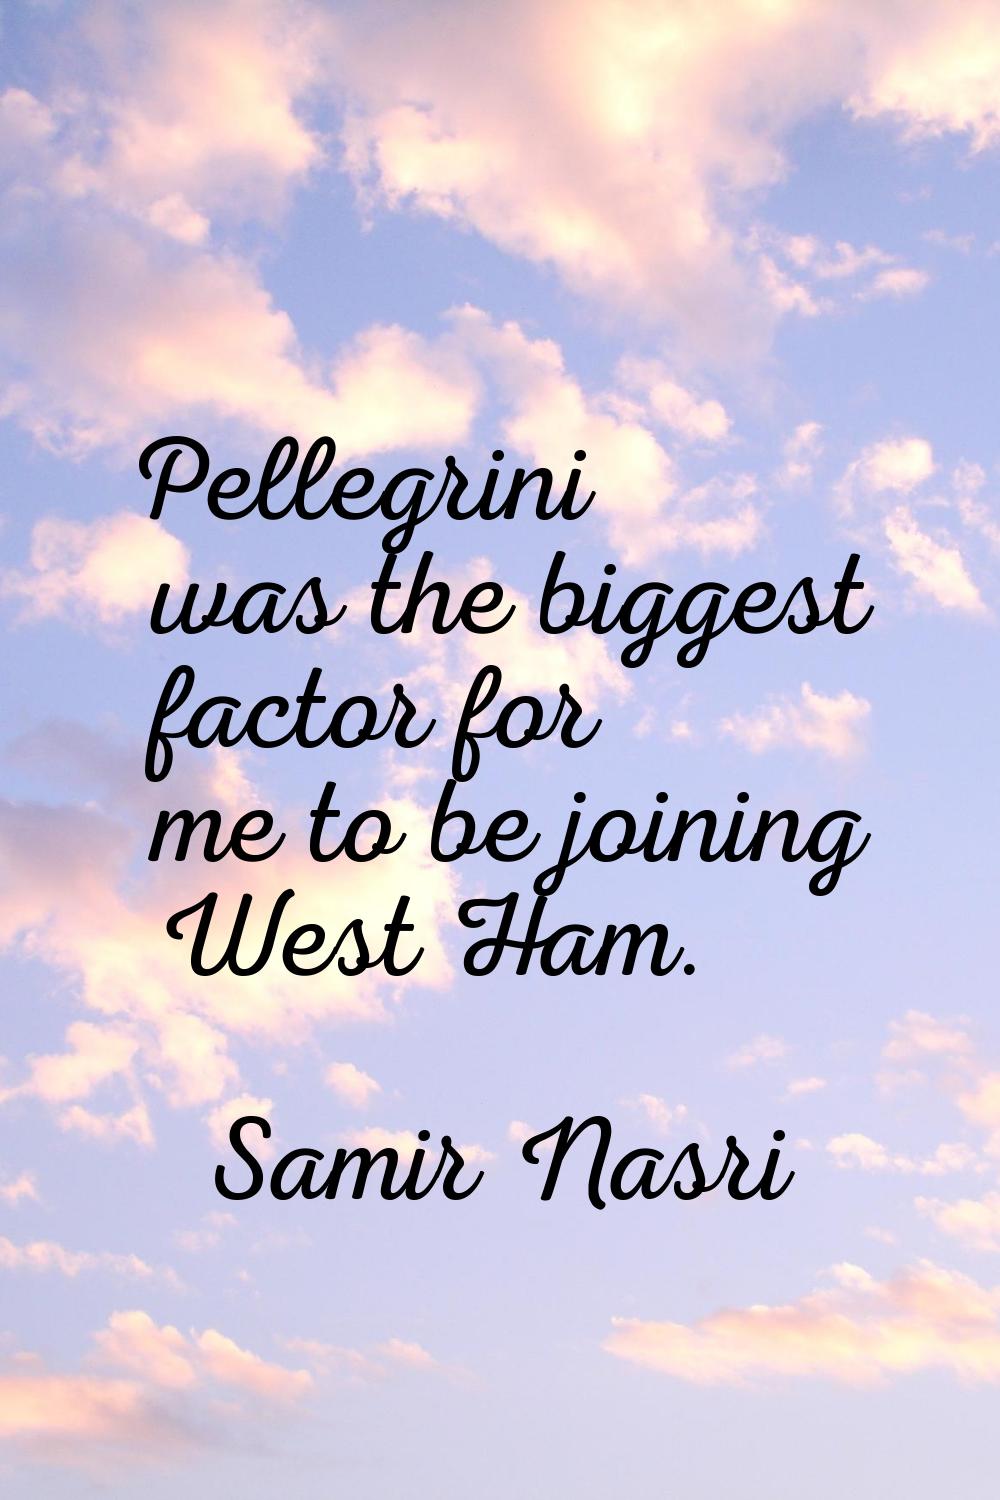 Pellegrini was the biggest factor for me to be joining West Ham.